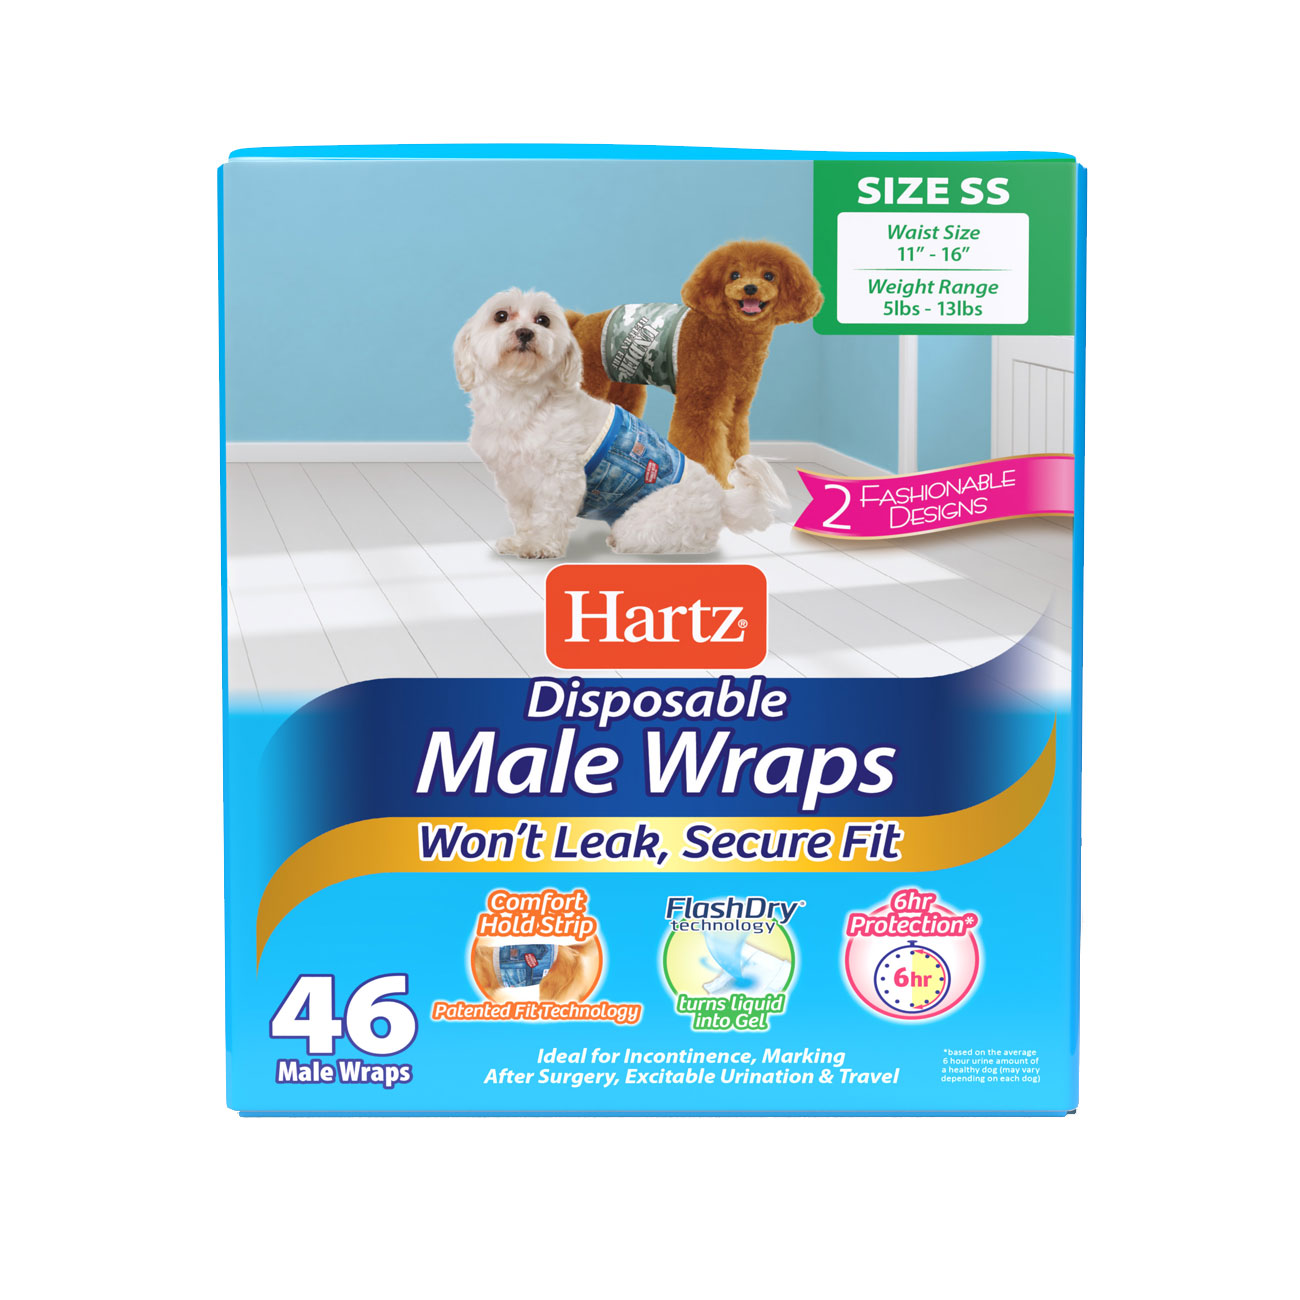 Hartz SKU# 3270011246. Hartz disposable male wraps. Back of 46 count package. Avoid unpleasant messes with Hartz disposable male wraps and Hartz disposable dog diapers. Front of package.